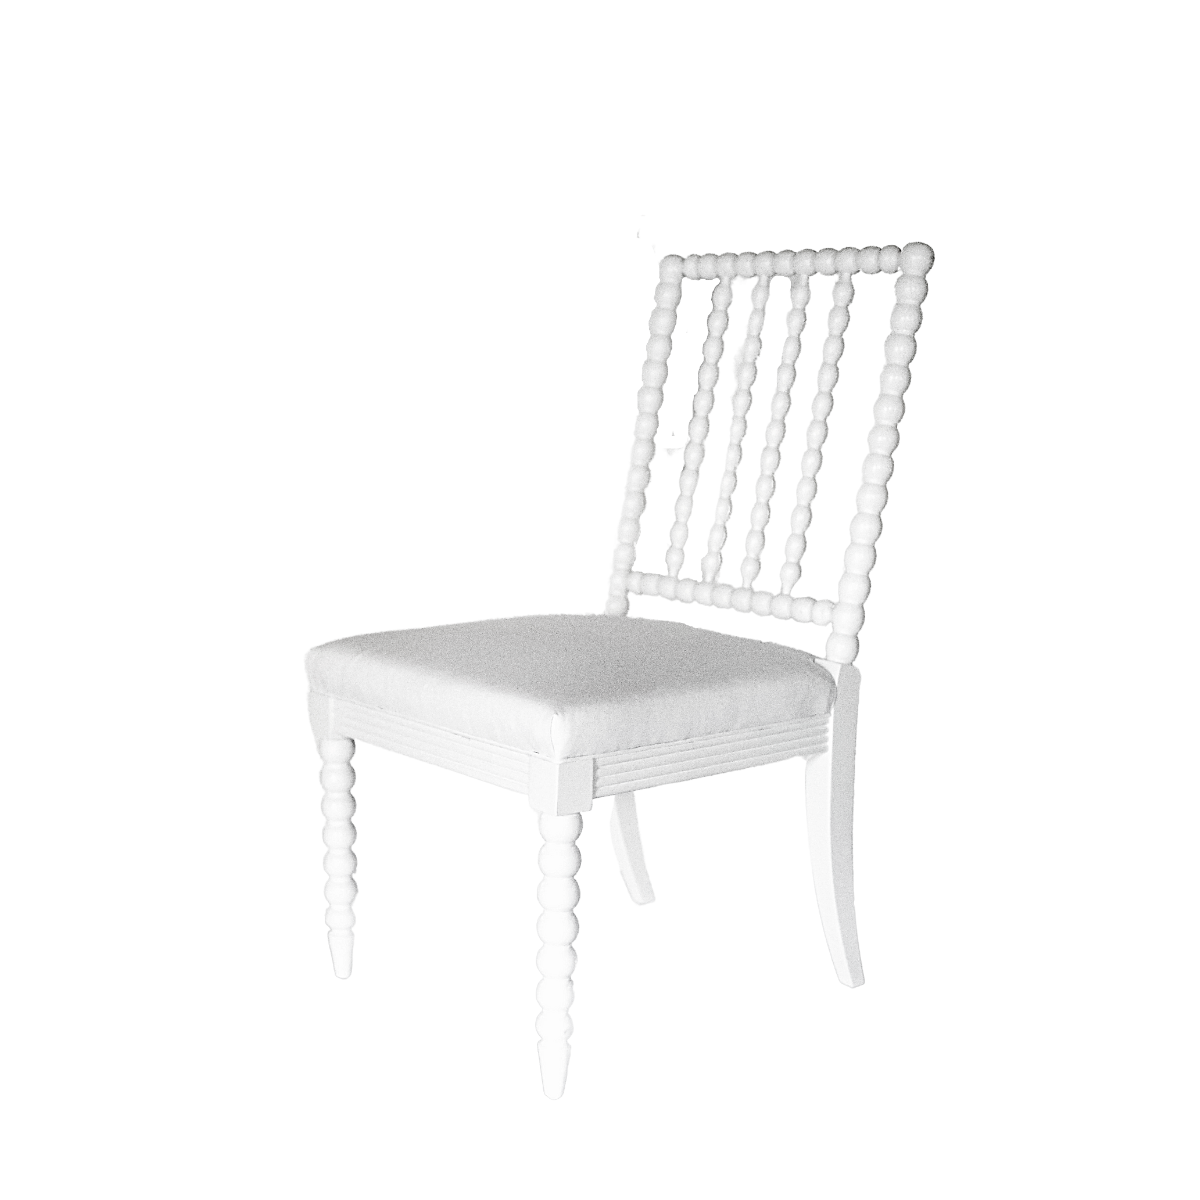 Bobbin Dining Chair with Rhubarb Gin Lane Upholstery